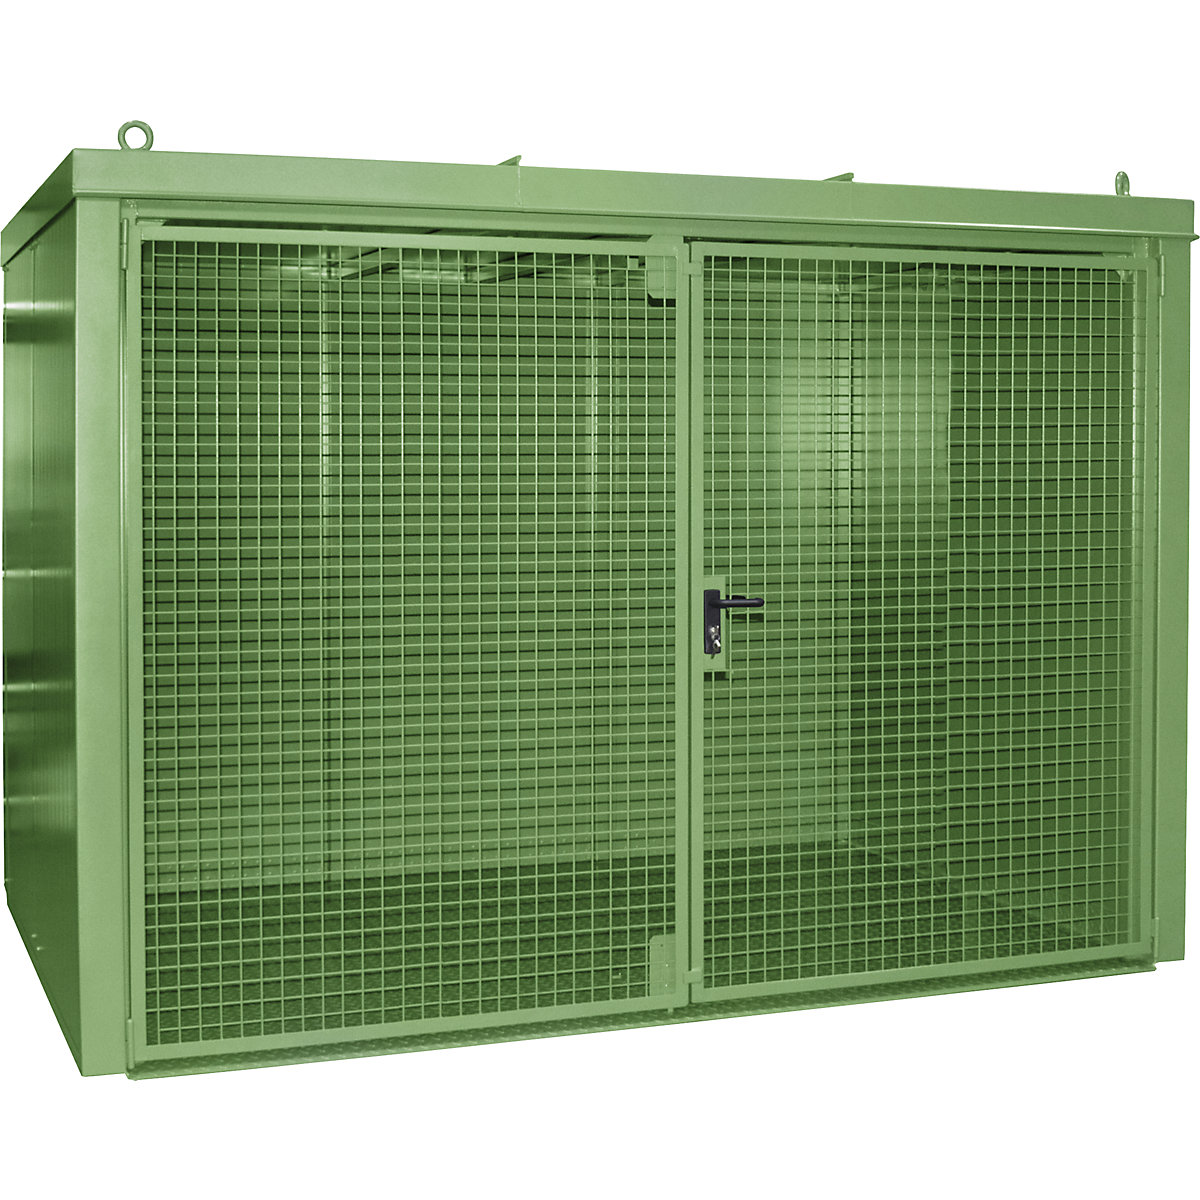 Gas cylinder container, fire resistant – eurokraft pro, for 60 cylinders with Ø 230 mm, green-3